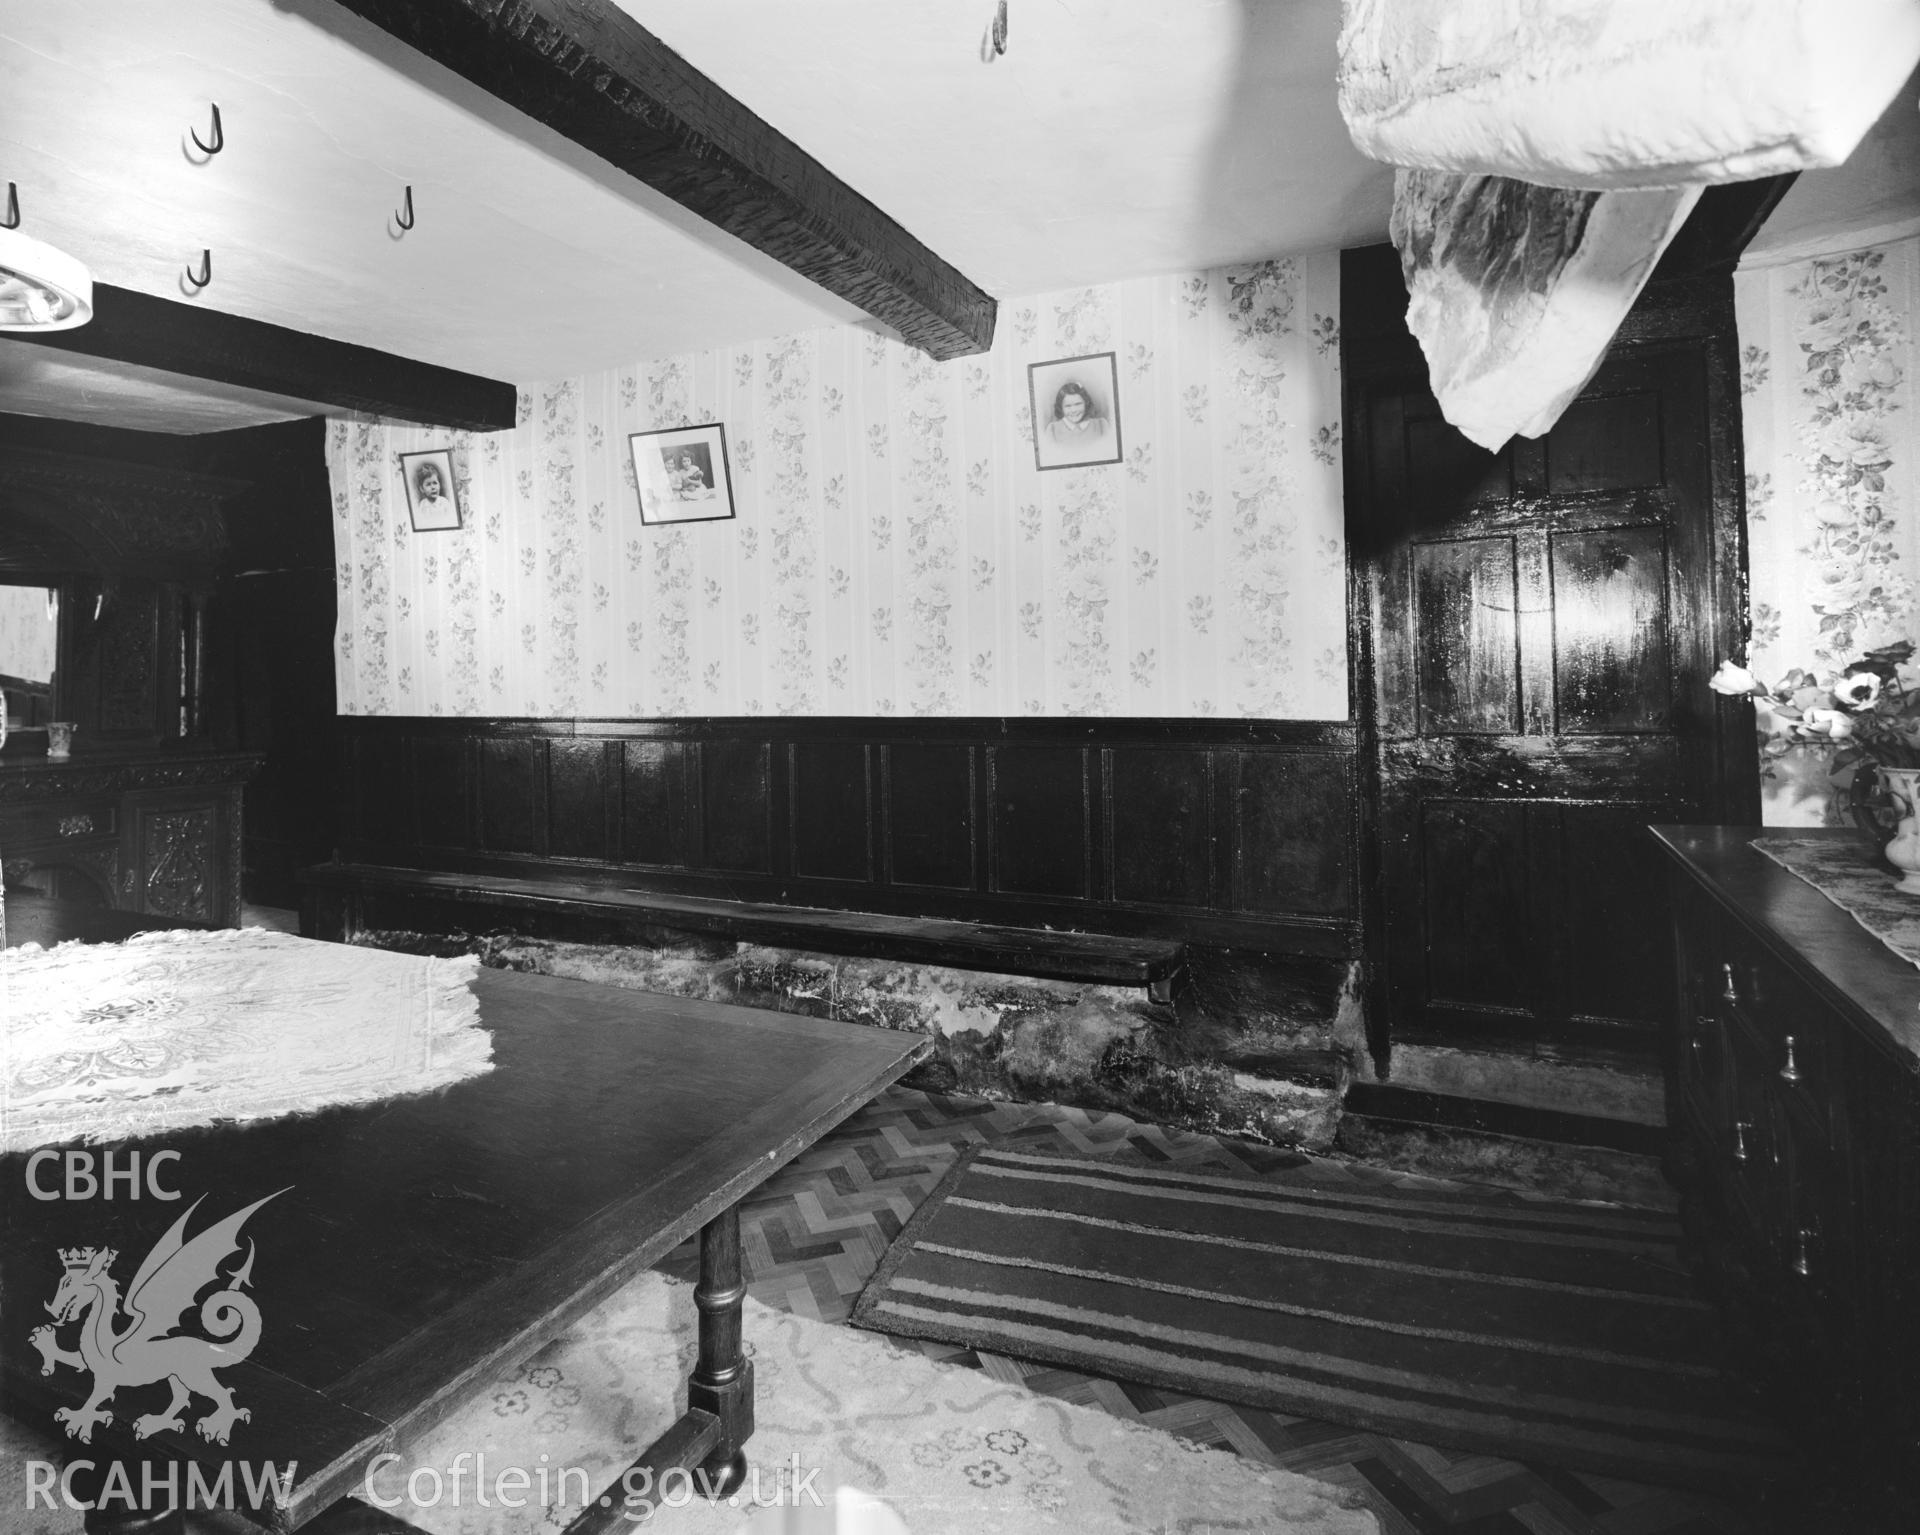 Farmhouse, interior view showing dais partition and bench in the hall